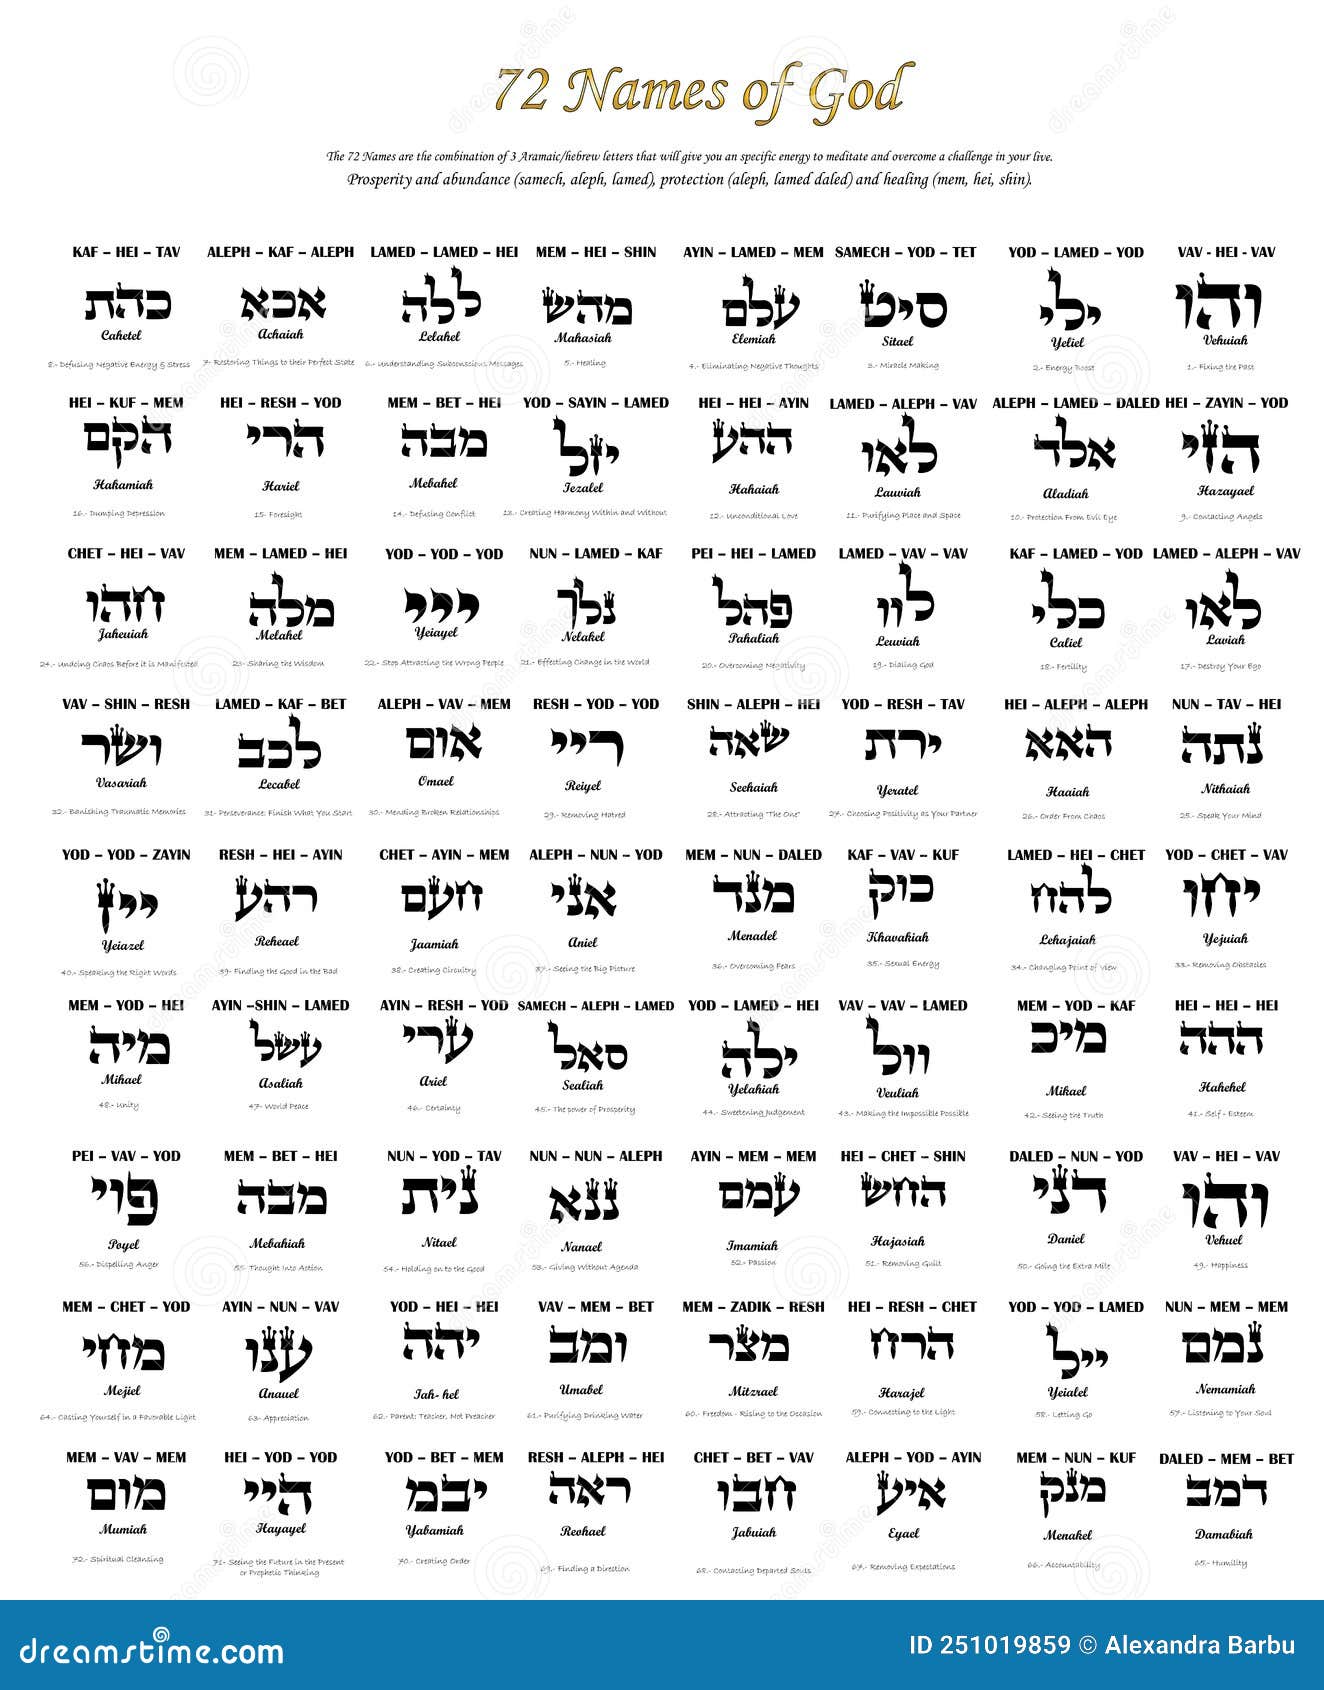 72-names-of-god-kabbalah-hebrew-letters-prosperity-protection